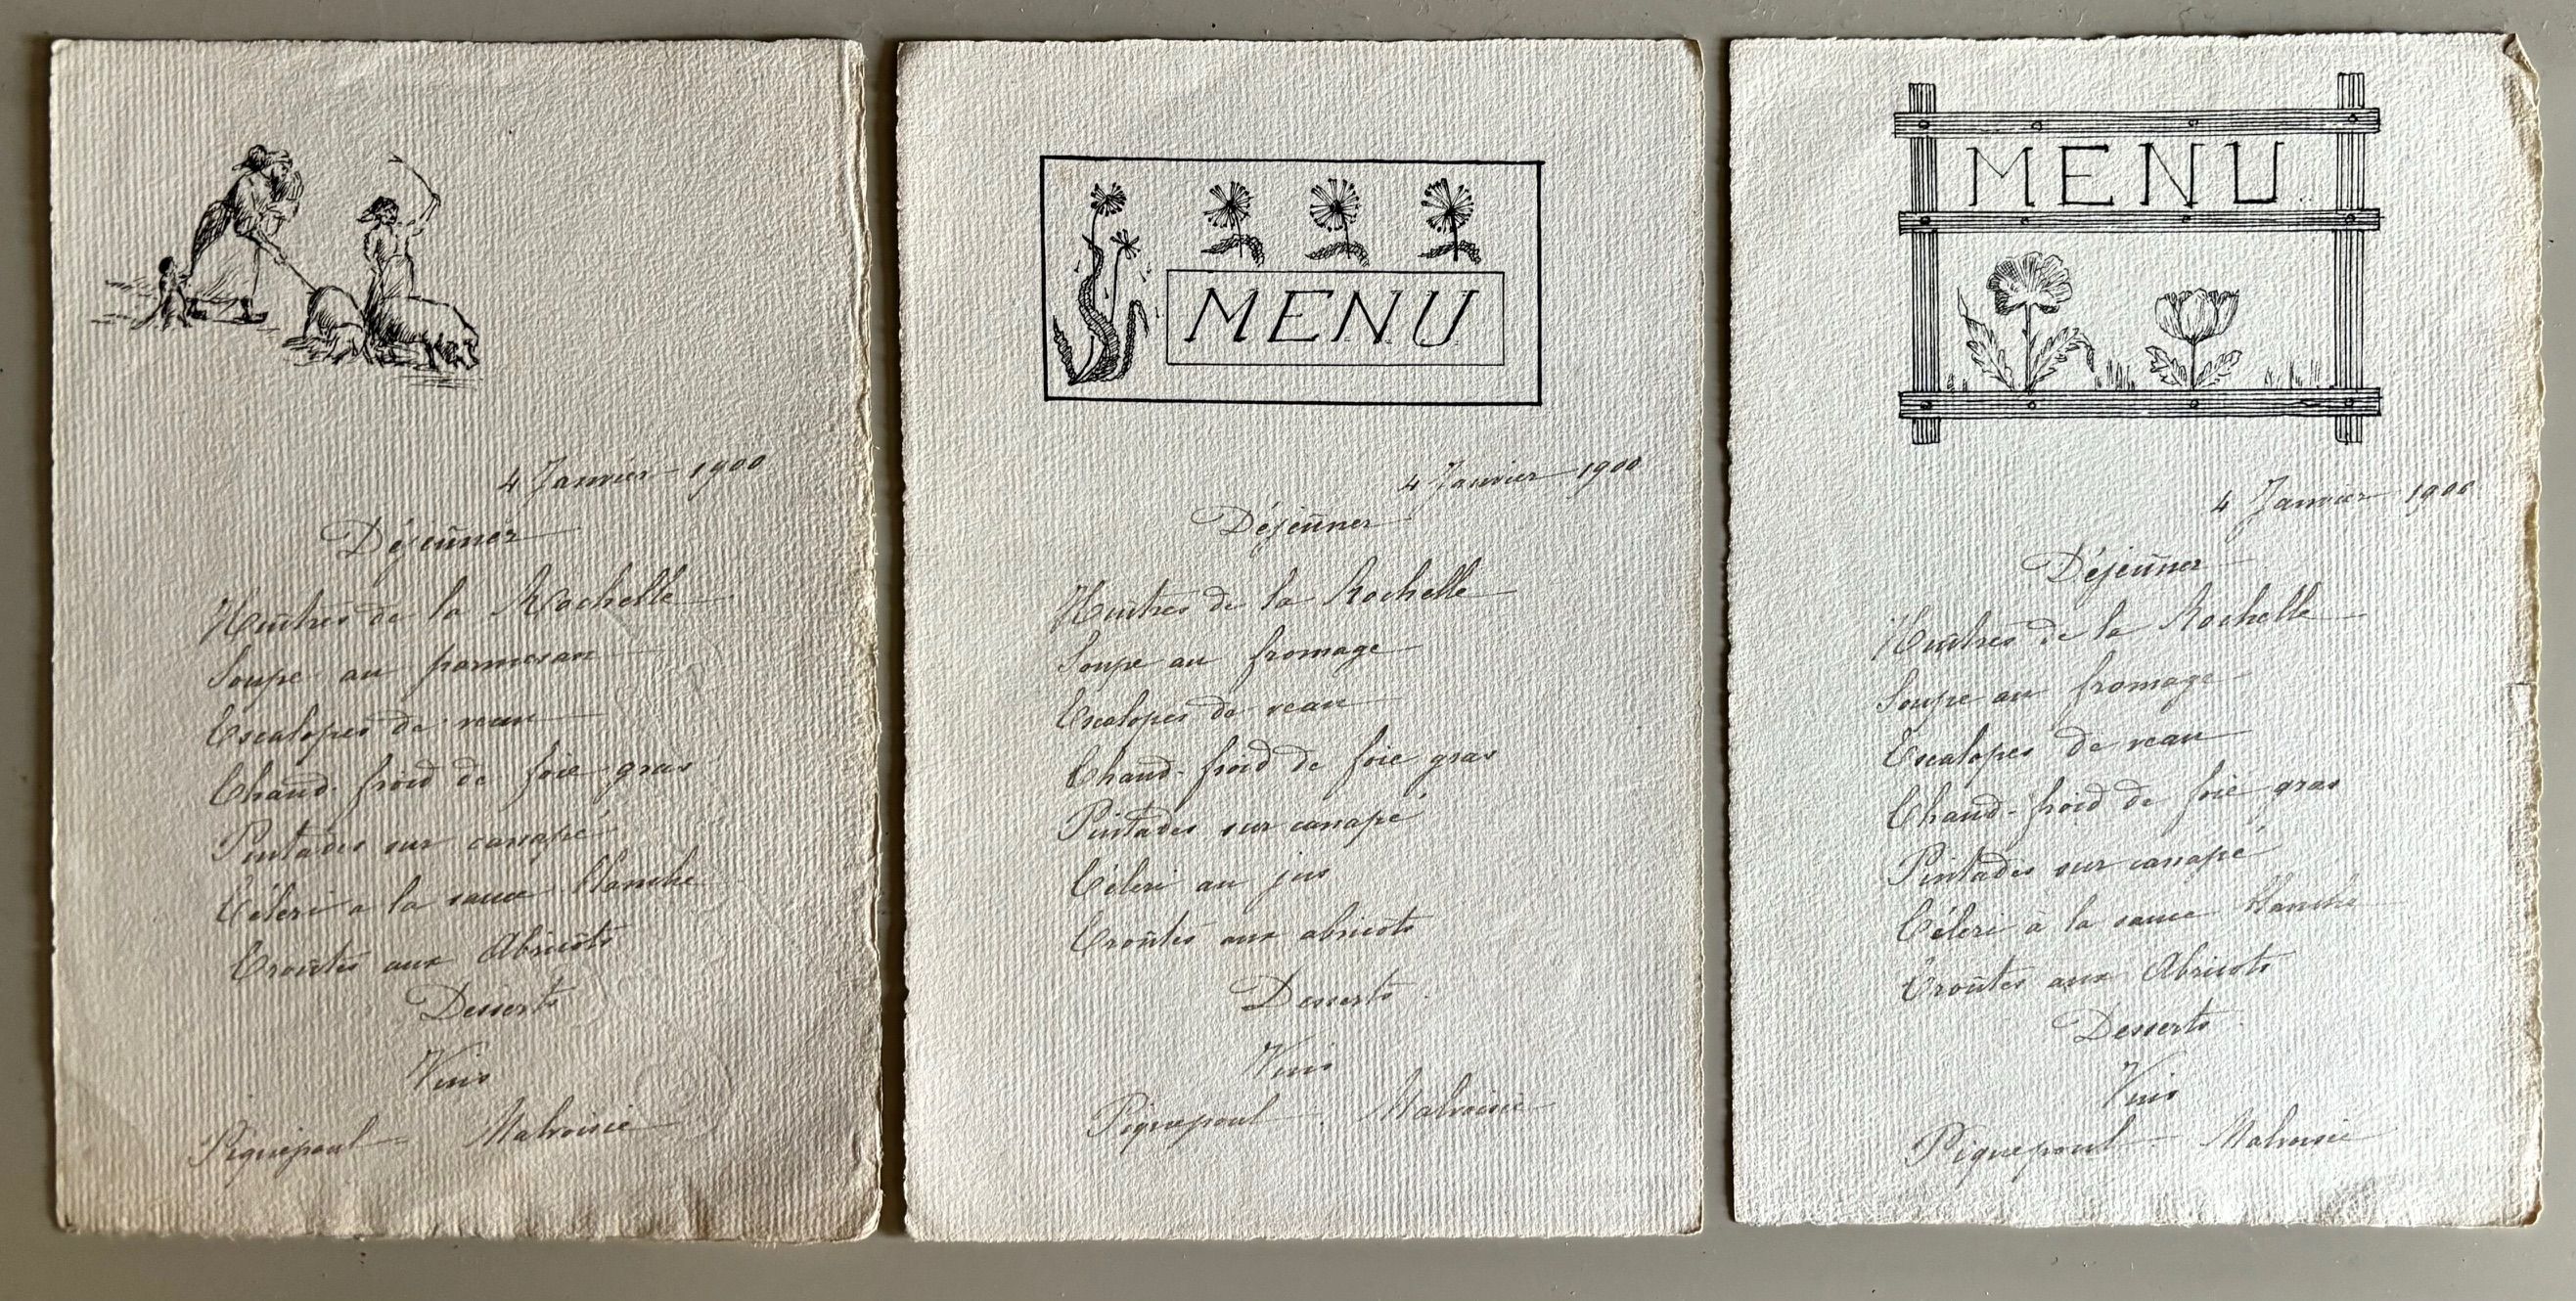 *NEW ARRIVAL* Three hand-written and illustrated menus